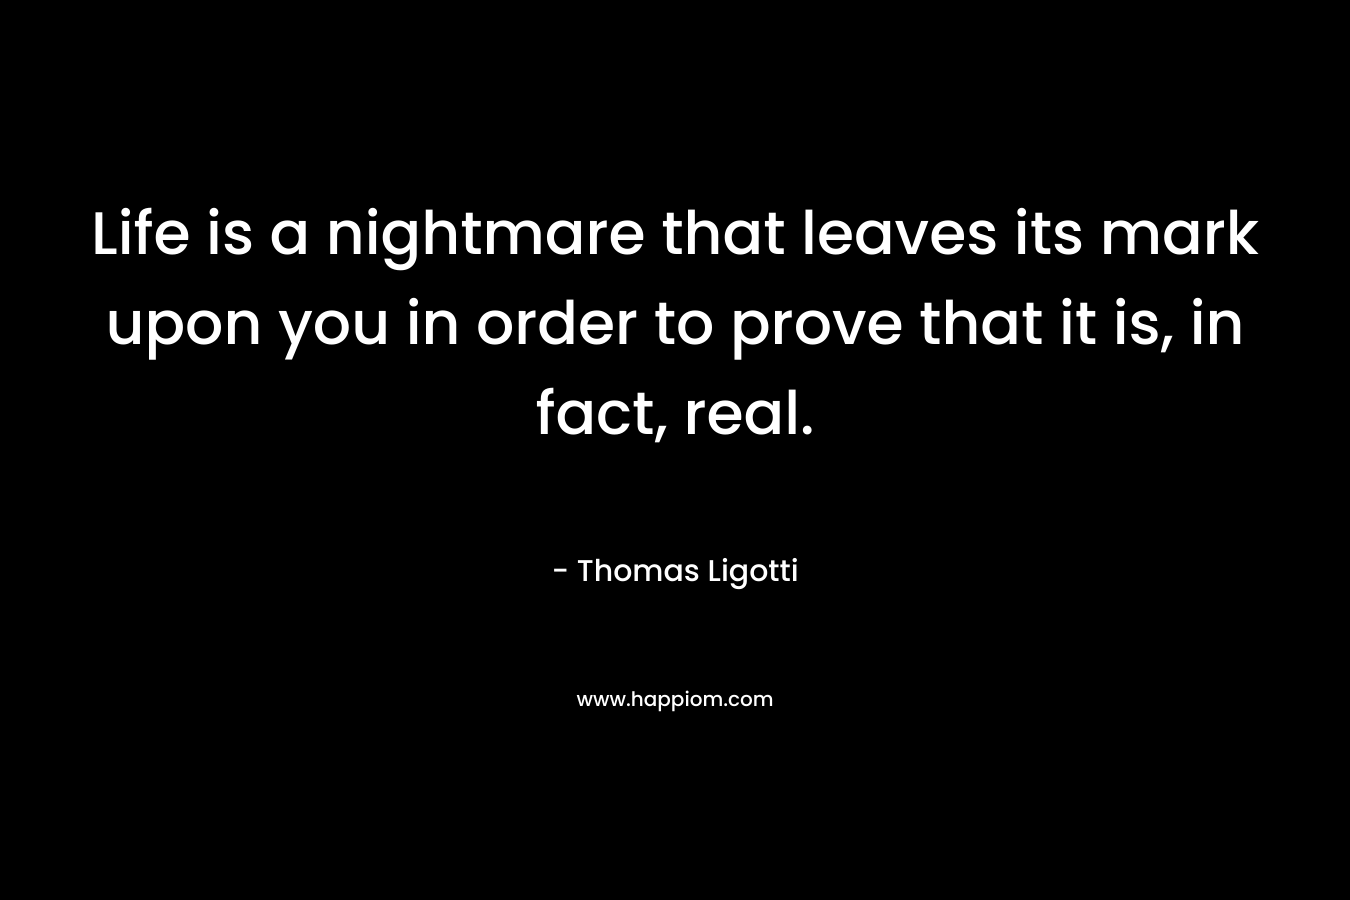 Life is a nightmare that leaves its mark upon you in order to prove that it is, in fact, real. – Thomas Ligotti